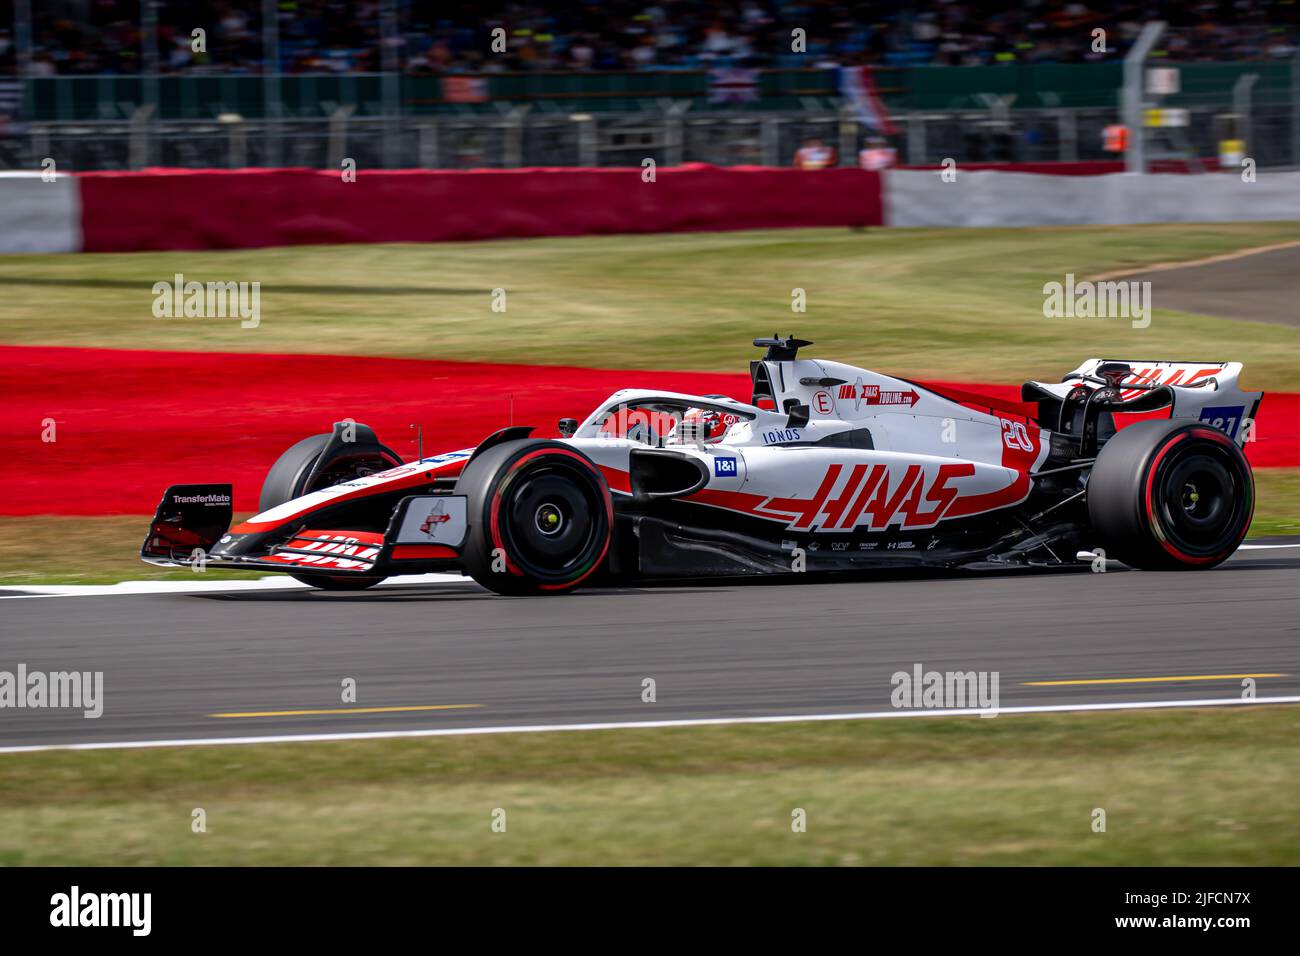 Silverstone, UK, 01st Jul 2022, Kevin Magnussen, from Denmark competes for Haas F1 . Practice, round 10 of the 2022 Formula 1 championship. Credit: Michael Potts/Alamy Live News Stock Photo